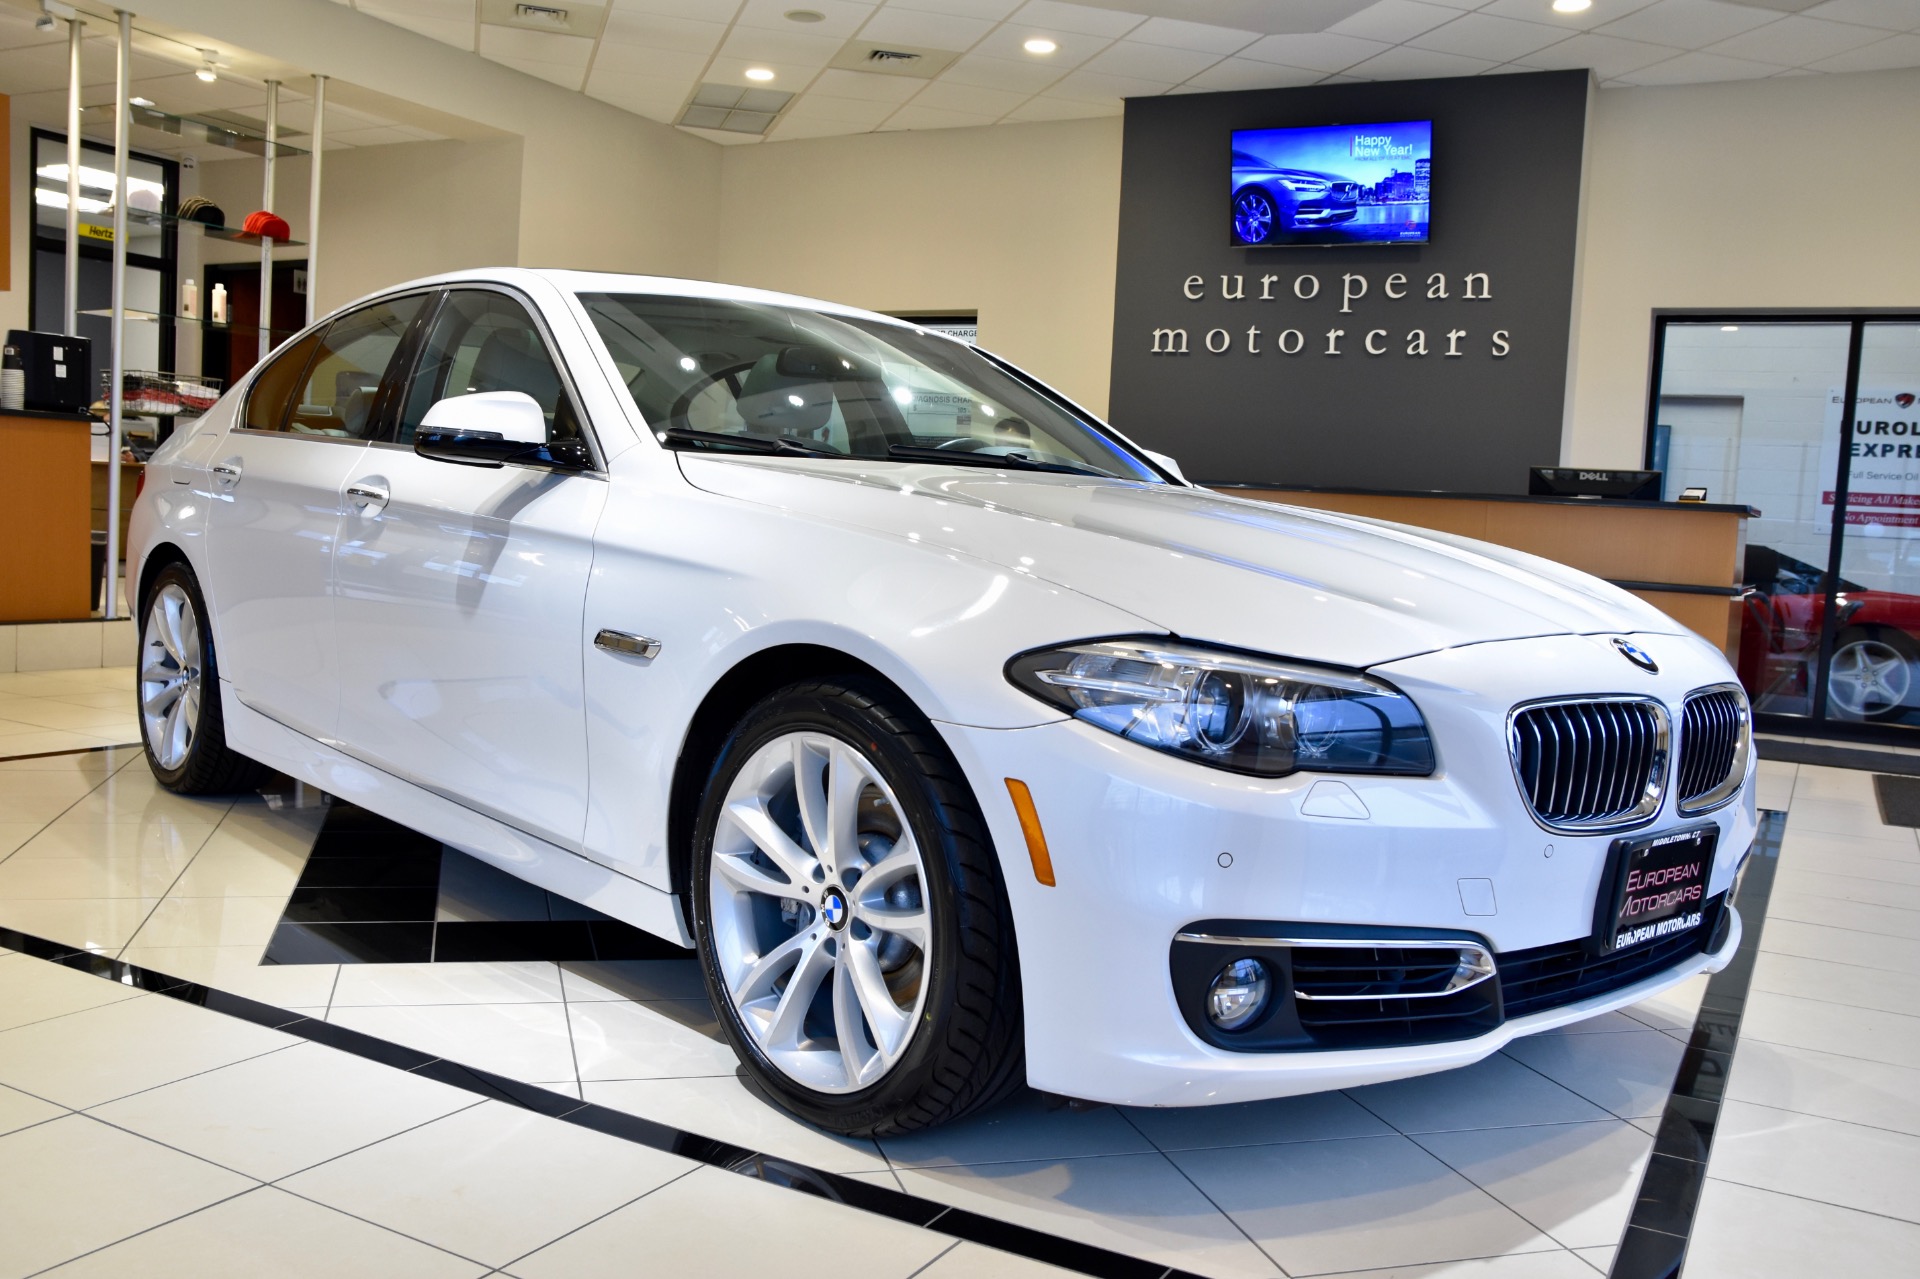 Get acquainted Blossom Consultation 2015 BMW 5 Series 535i xDrive for sale near Middletown, CT | CT BMW Dealer  - Stock # 546530